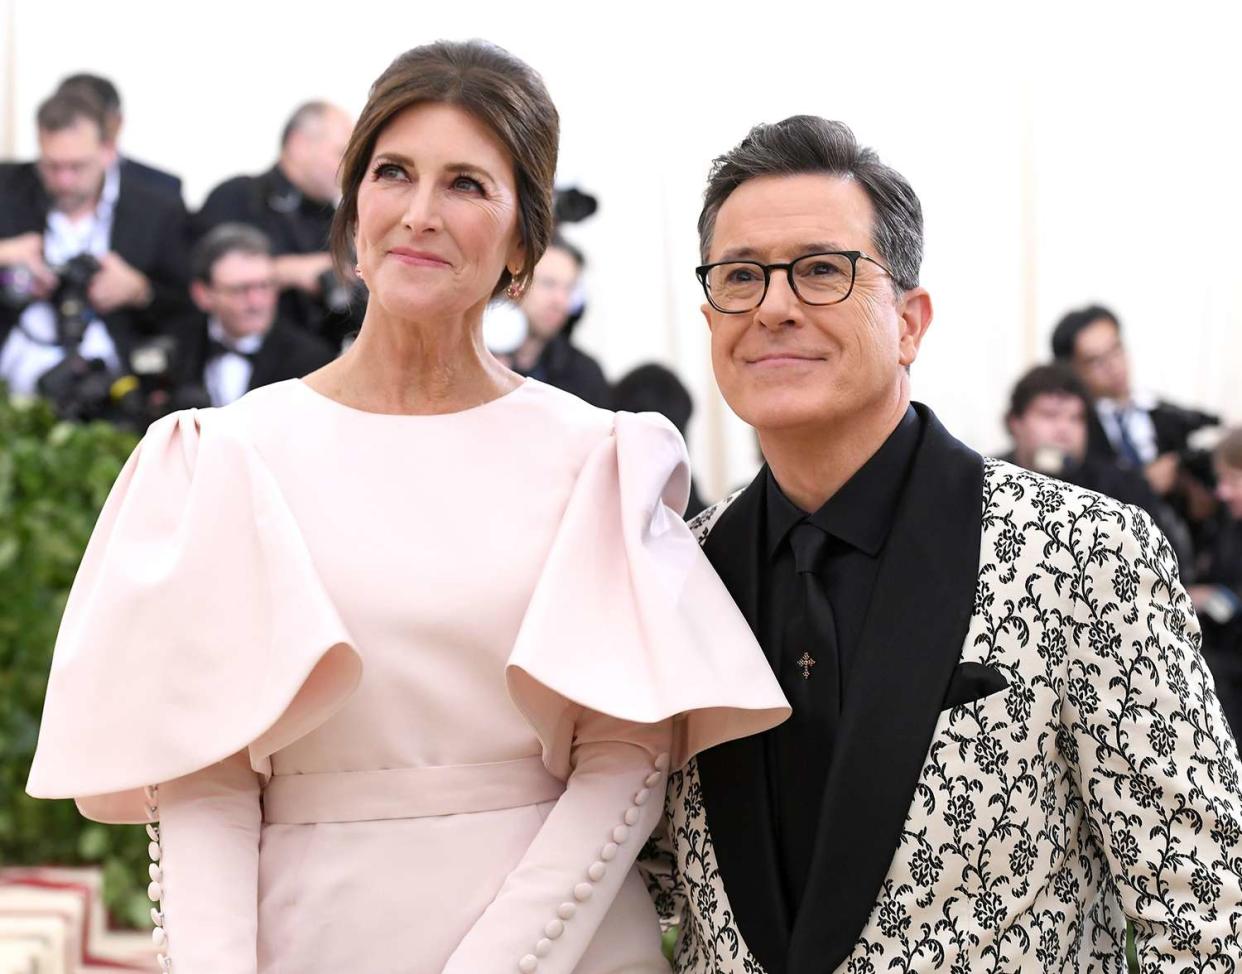 Stephen Colbert (R) and Evelyn McGee-Colbert attend the Heavenly Bodies: Fashion & The Catholic Imagination Costume Institute Gala at The Metropolitan Museum of Art on May 7, 2018 in New York City.